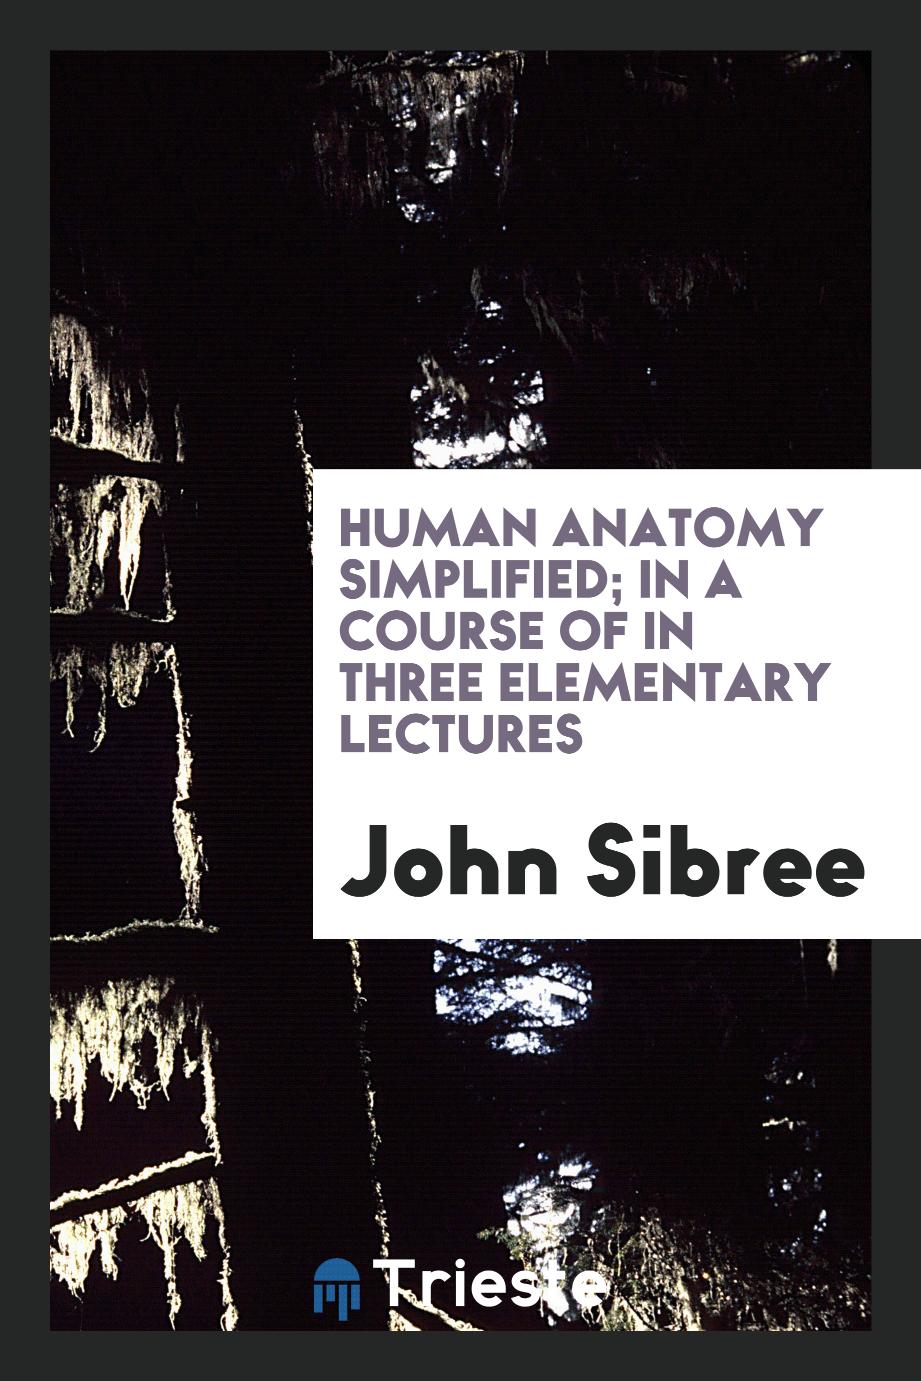 Human anatomy simplified; in a course of in three elementary lectures